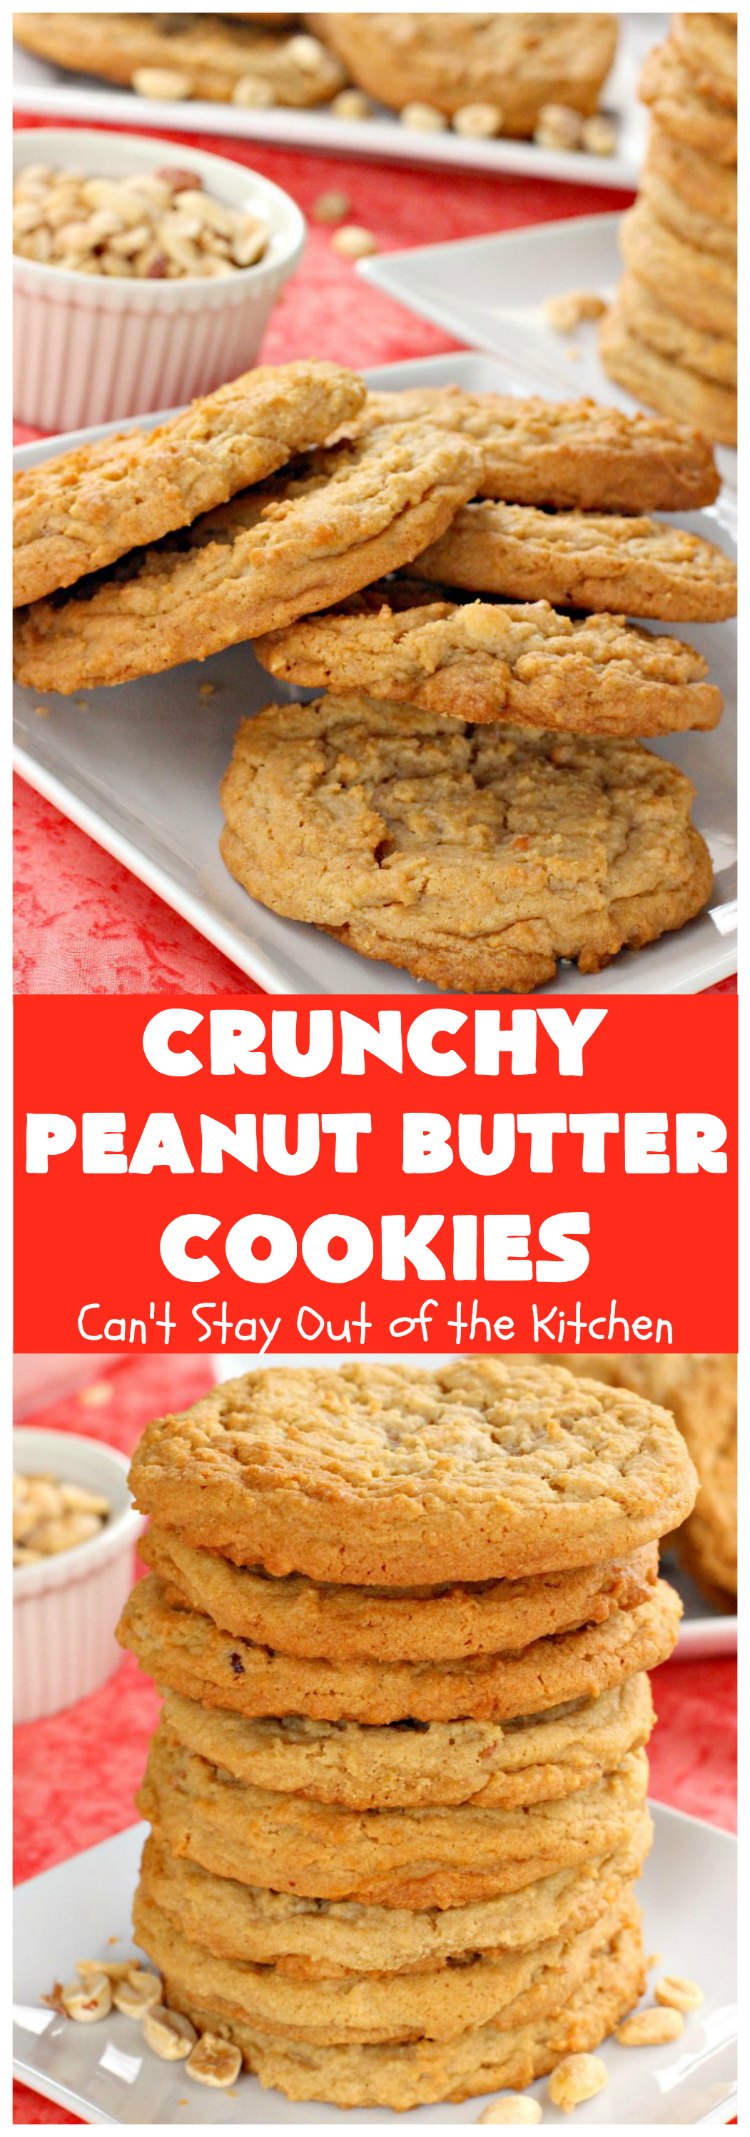 Crunchy Peanut Butter Cookies | Can't Stay Out of the Kitchen